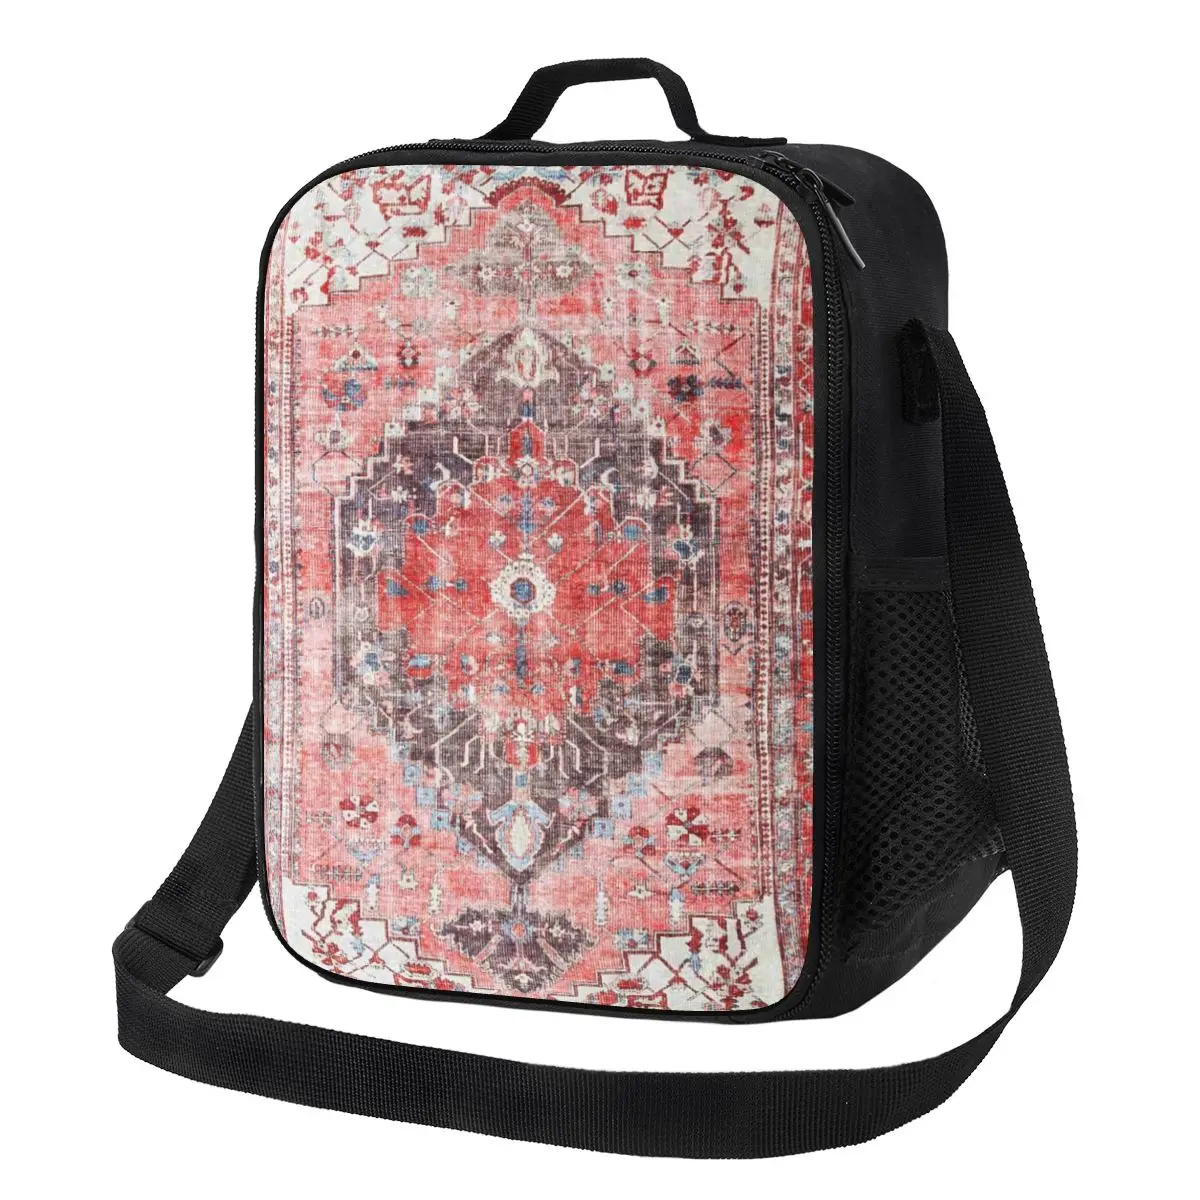 

Vintage Oriental Moroccan Style Artwork Insulated Lunch Bags for Antique Bohemian Resuable Cooler Thermal Food Bento Box Kids